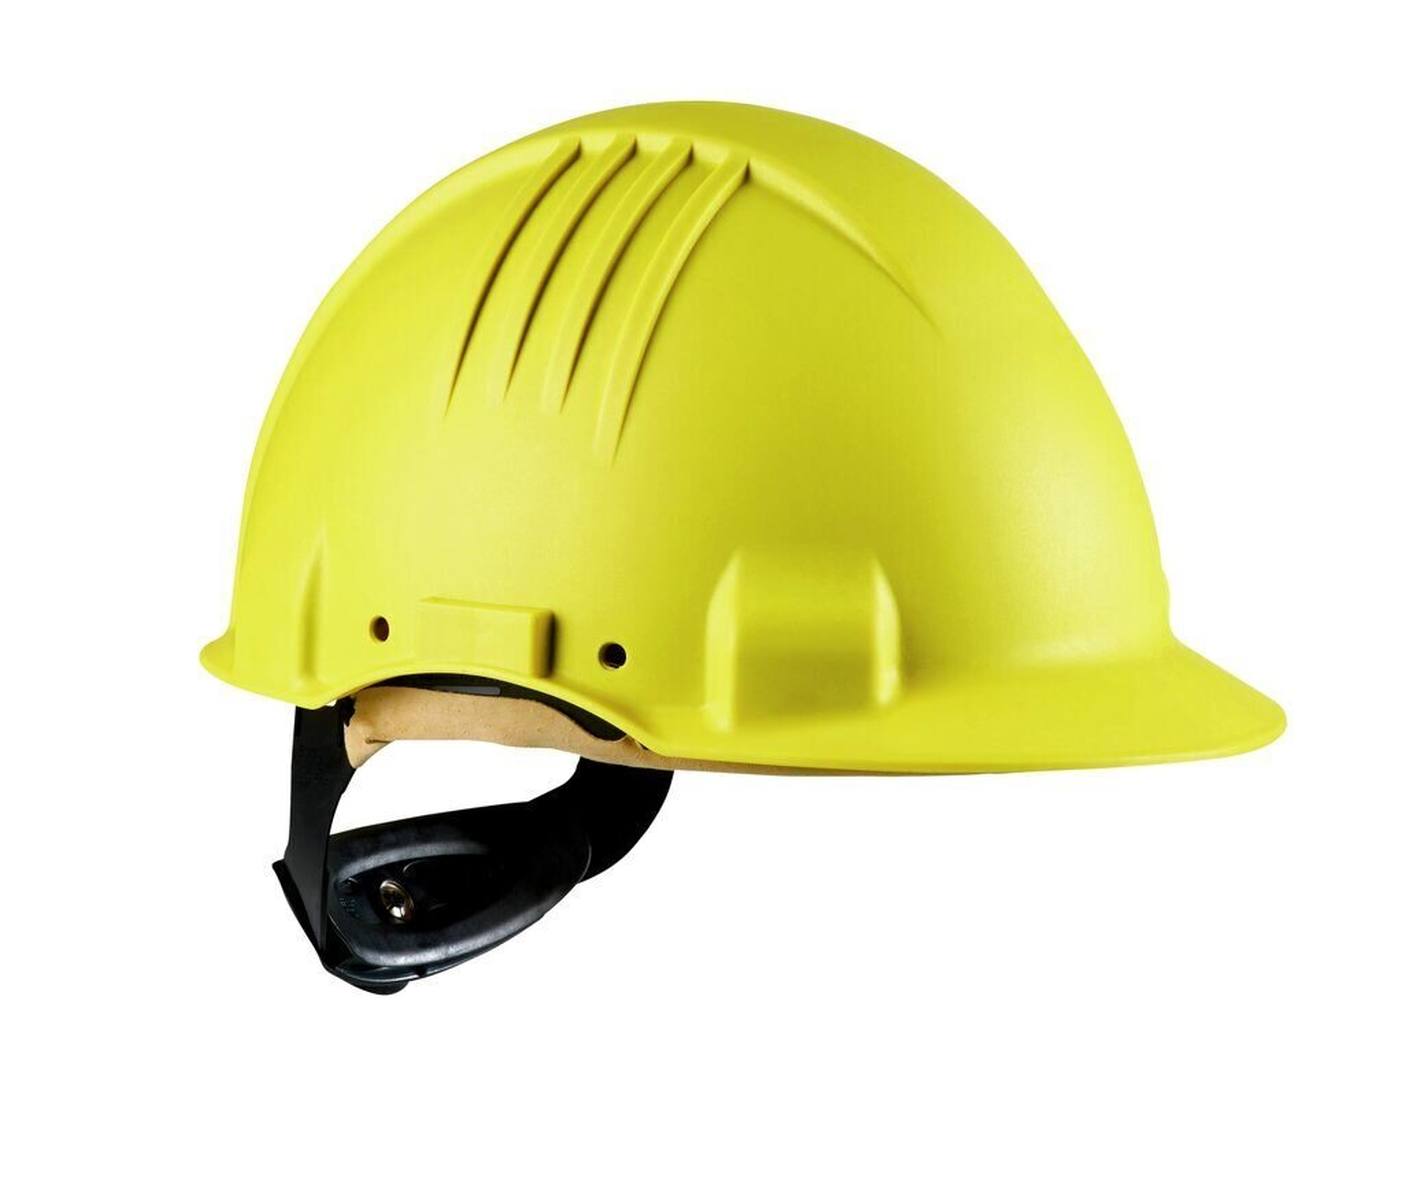 3M High-temperature safety helmet, ratchet fastening, non-ventilated, dielectric 1000 V, leather sweatband, yellow, G3501M-GU